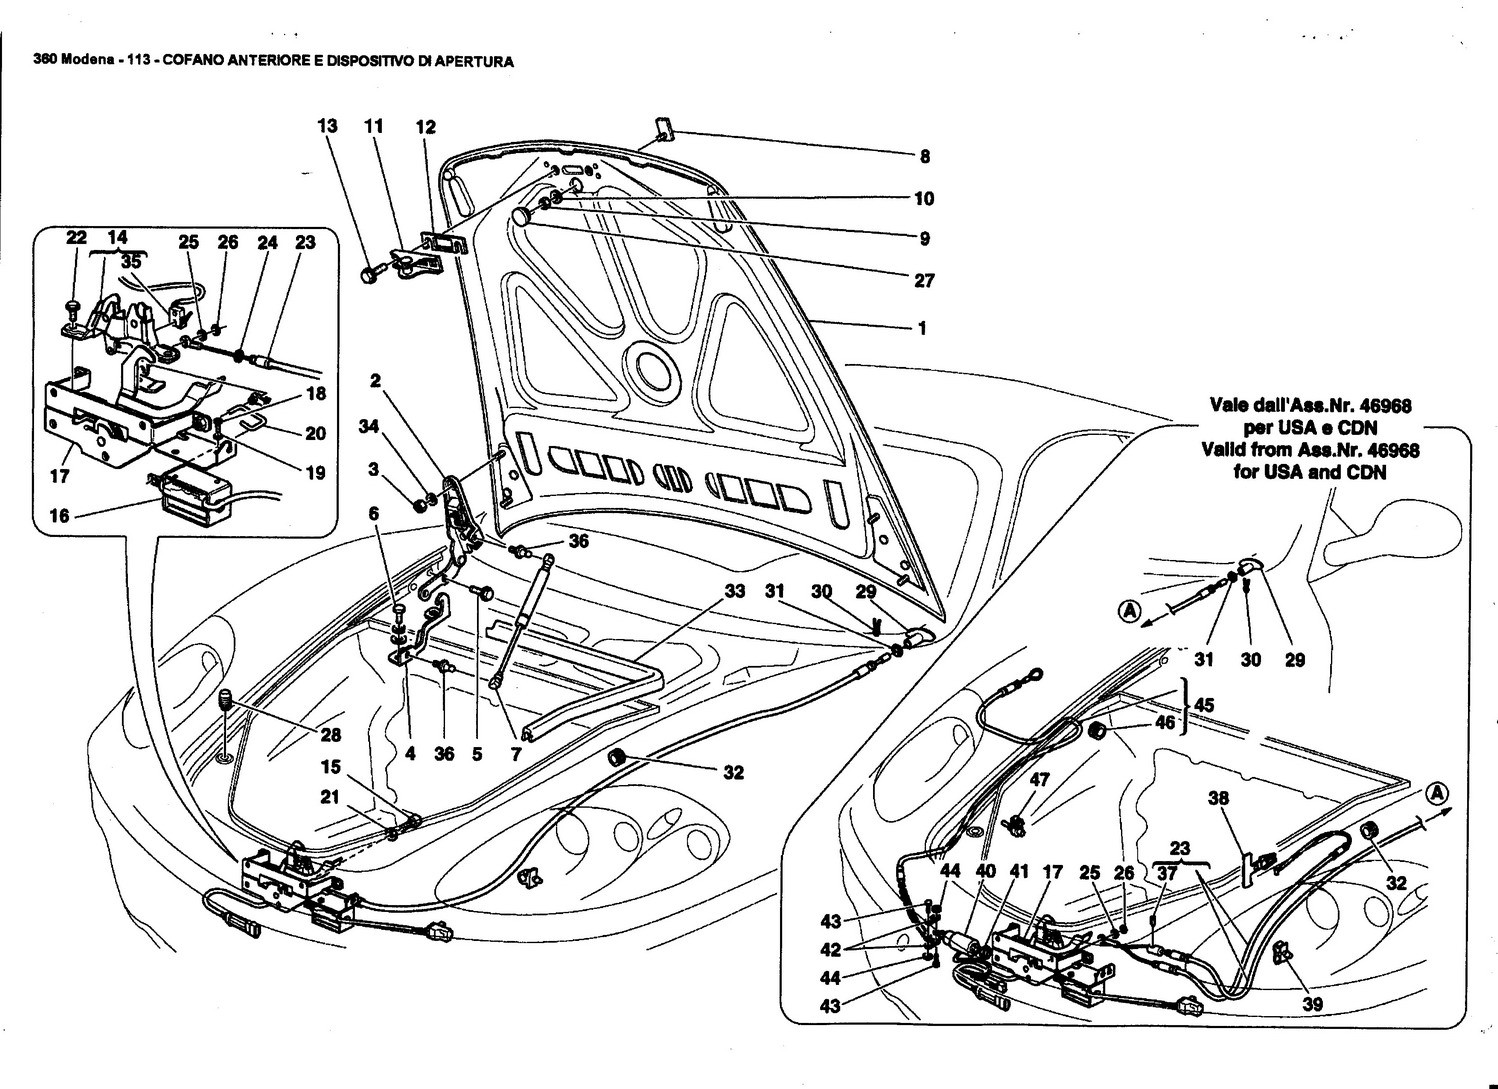 FRONT HOOD AND OPENING DEVICE